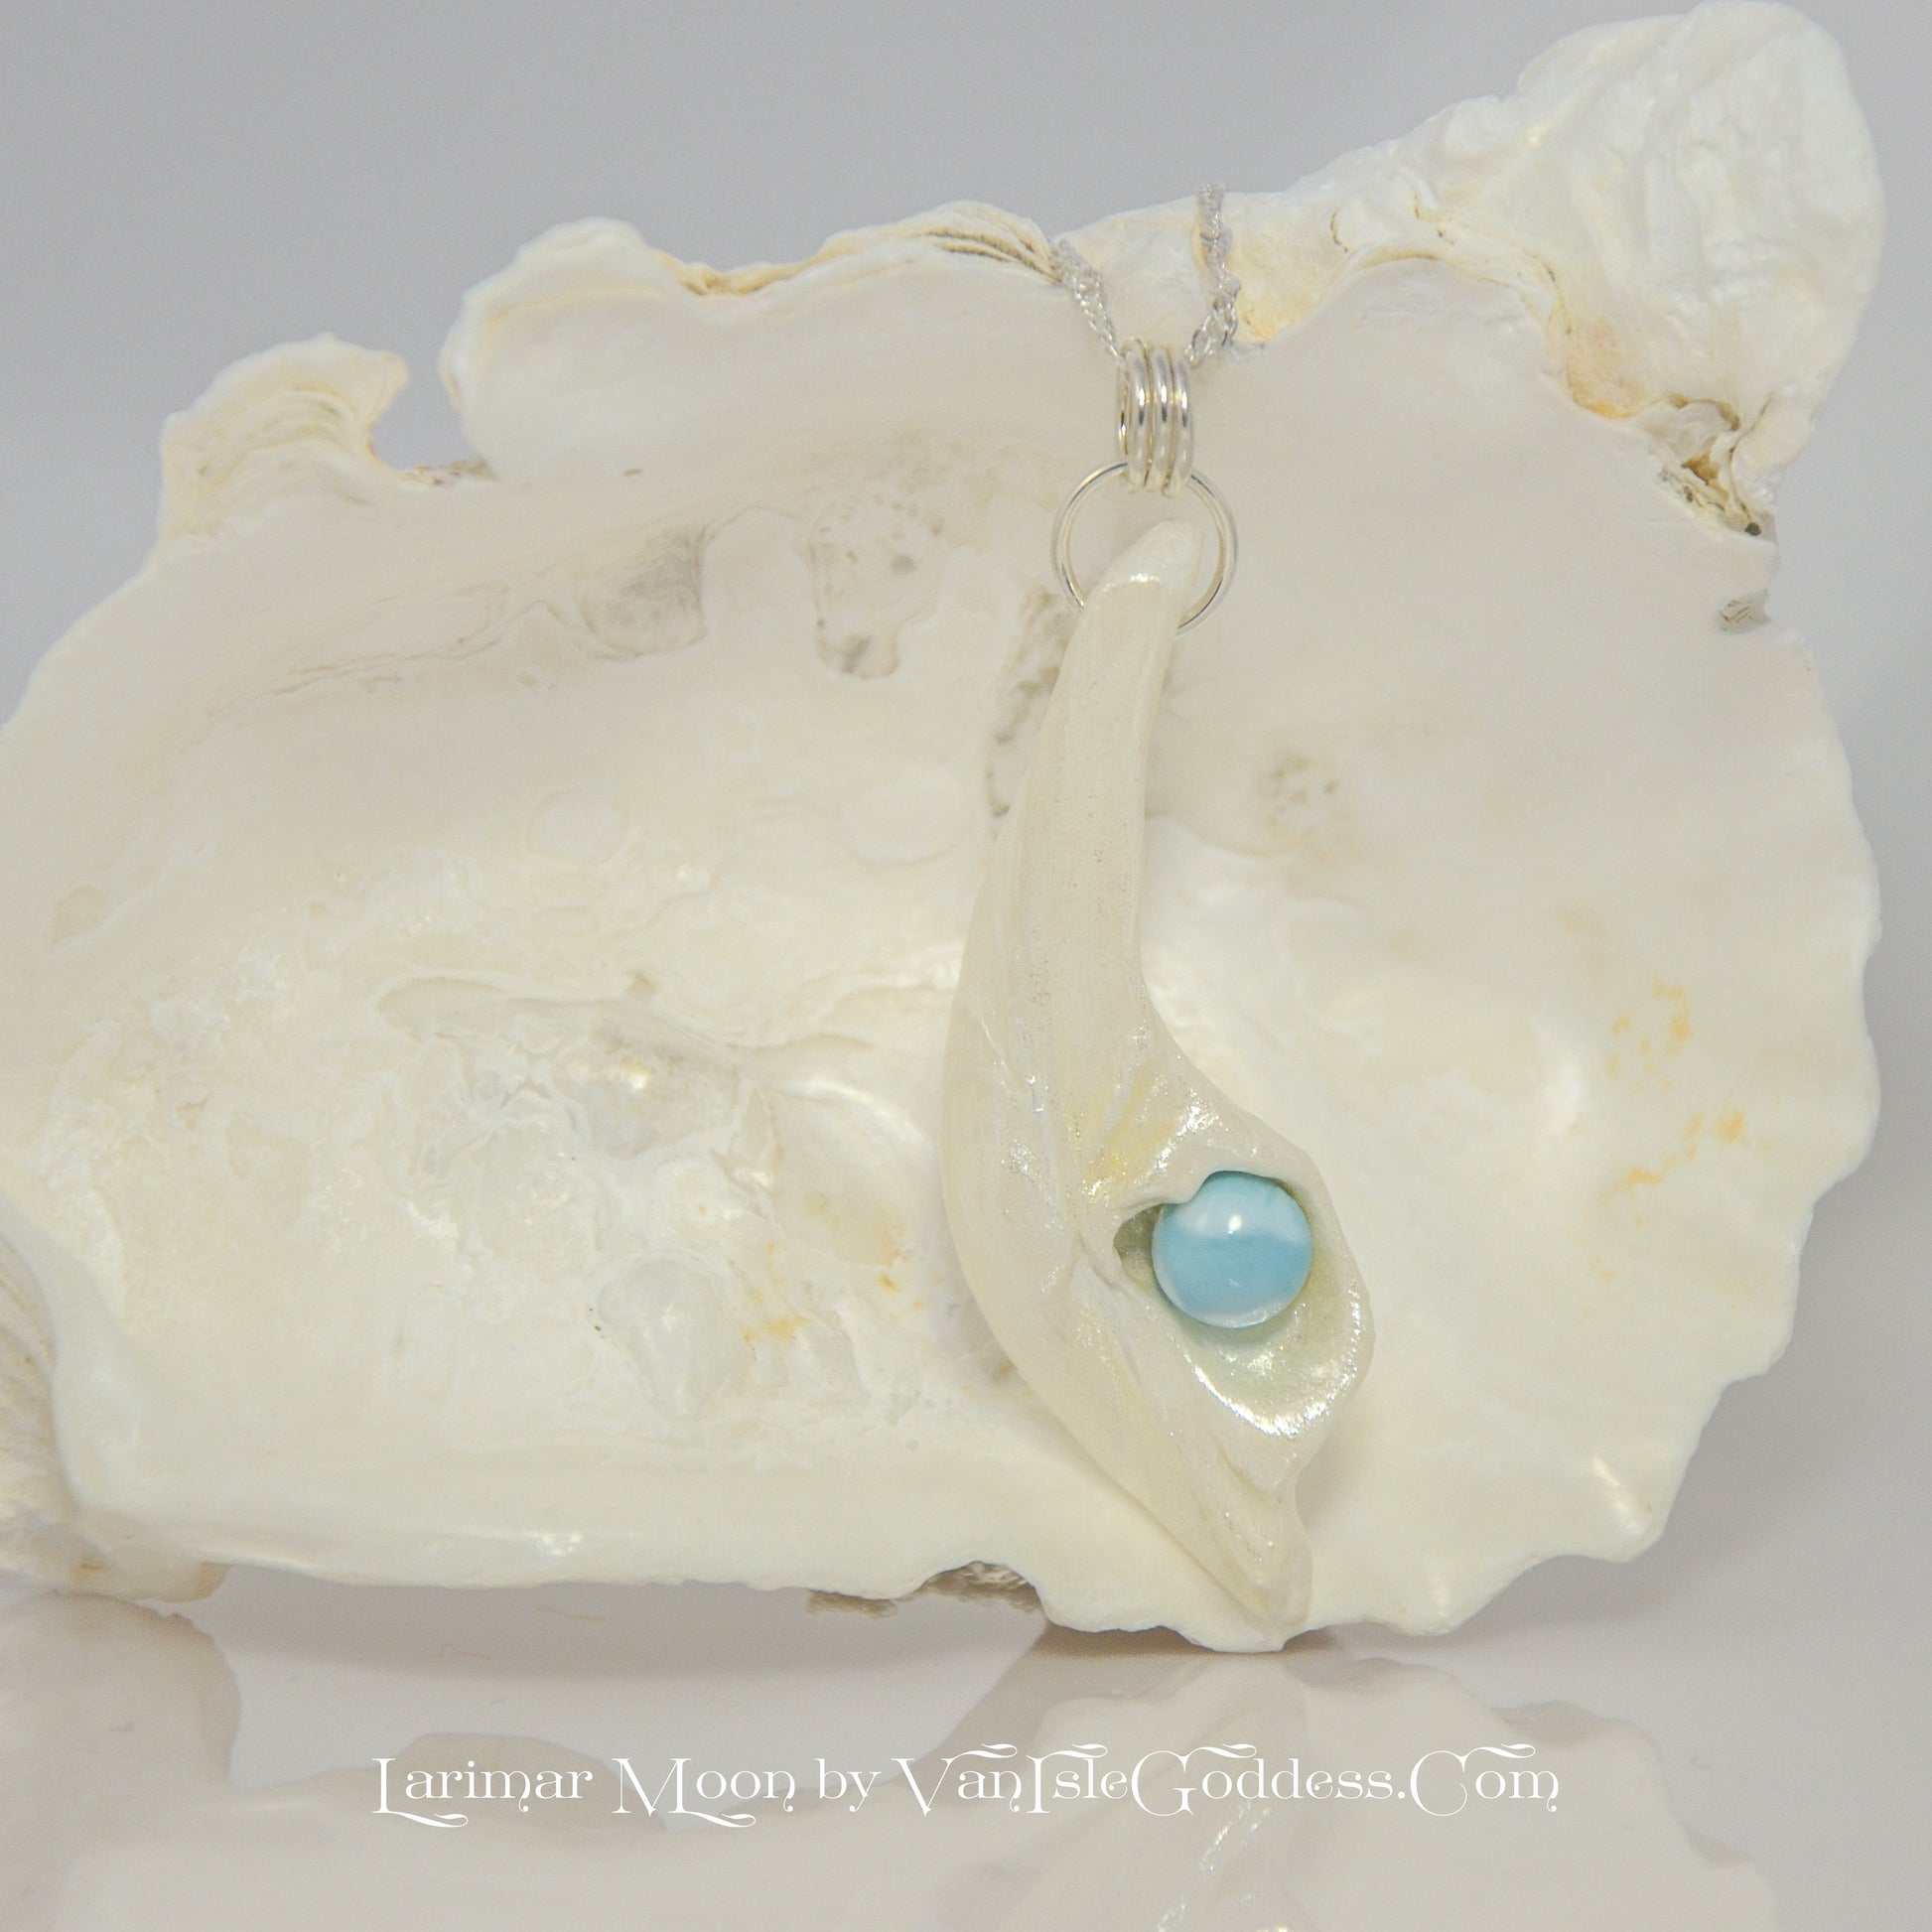 Larimar Moon Natural seashell a beautiful 10 mm Round Larimar Gemstone compliments the pendant. The pendant is shown hanging on a larger seashell.